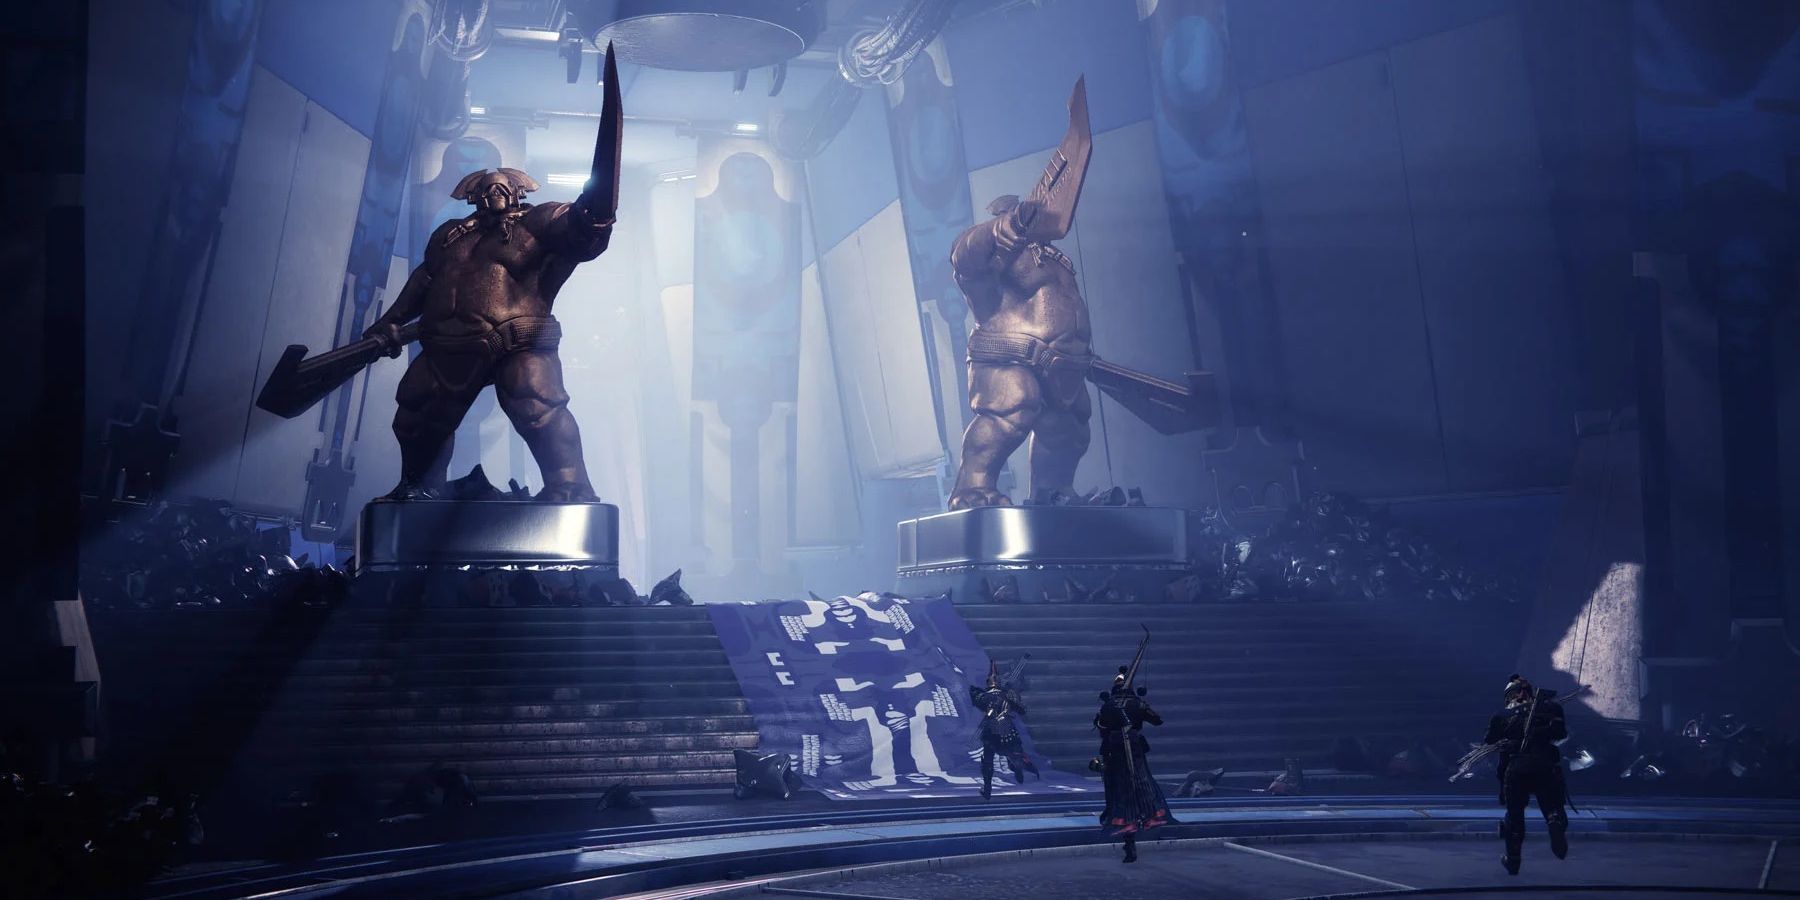 destiny 2 proving grounds strike as next weeks featured nightfall february 1st